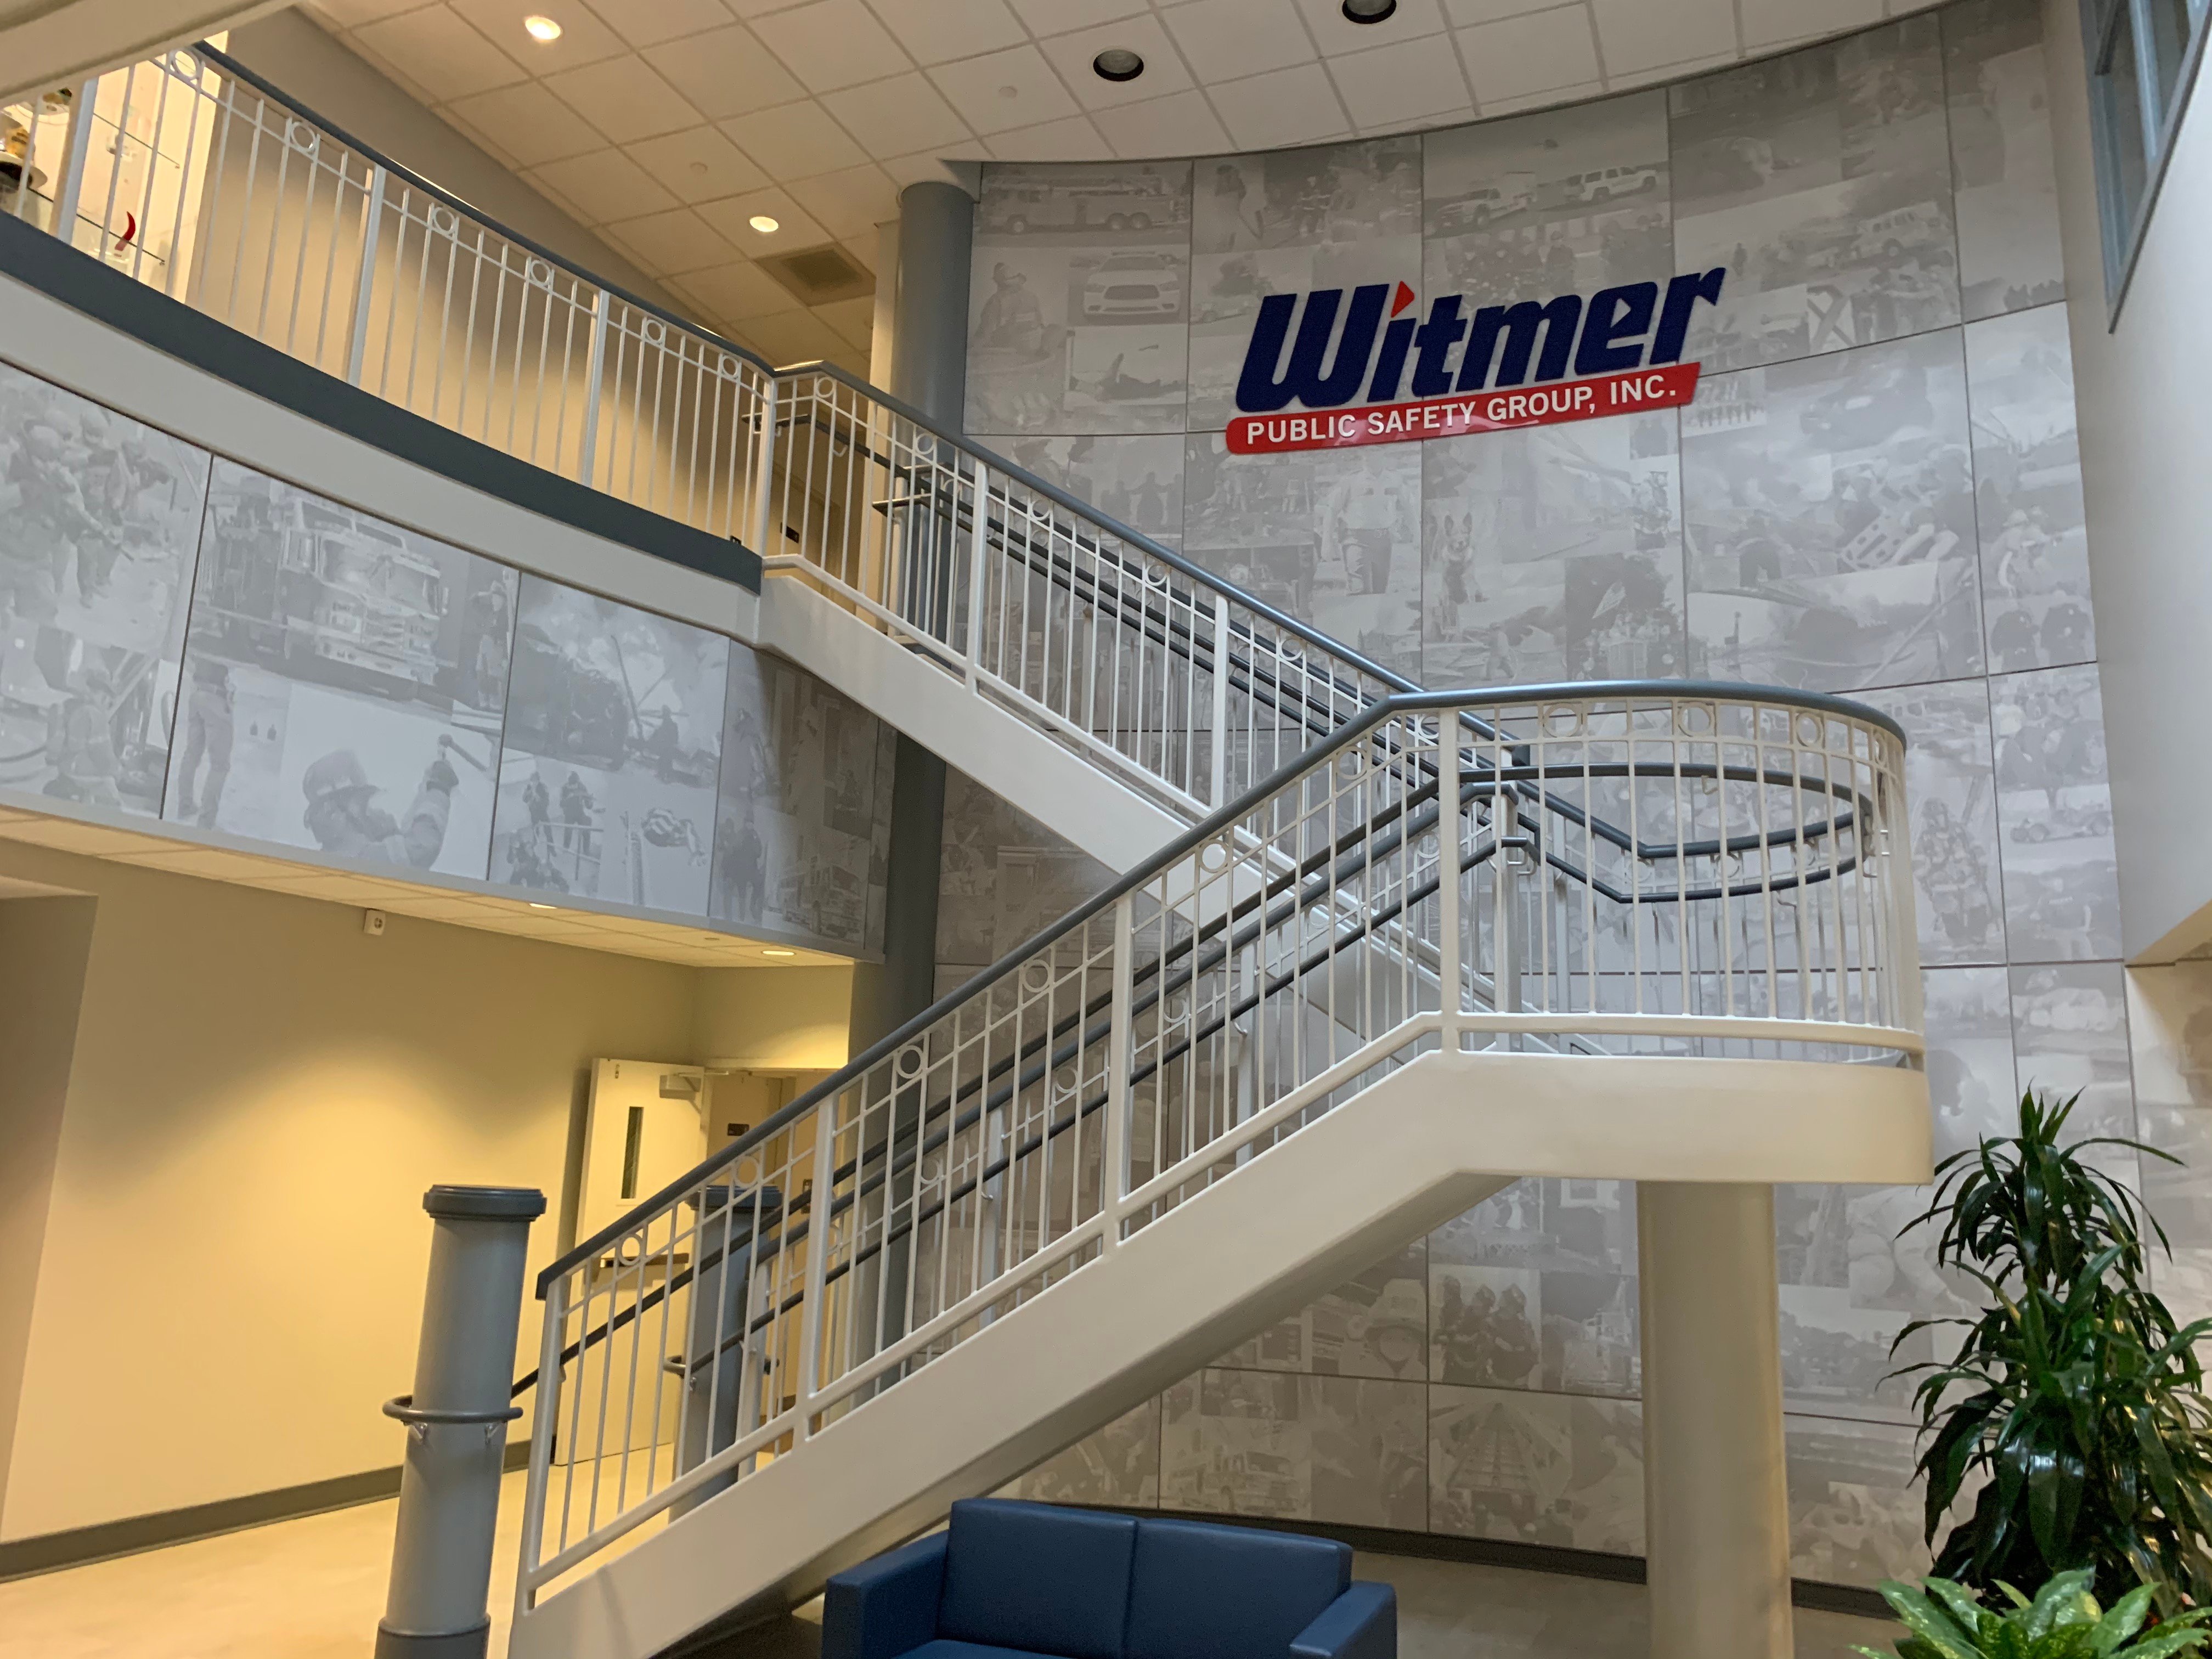 Witmer Public Safety Image of Staircase